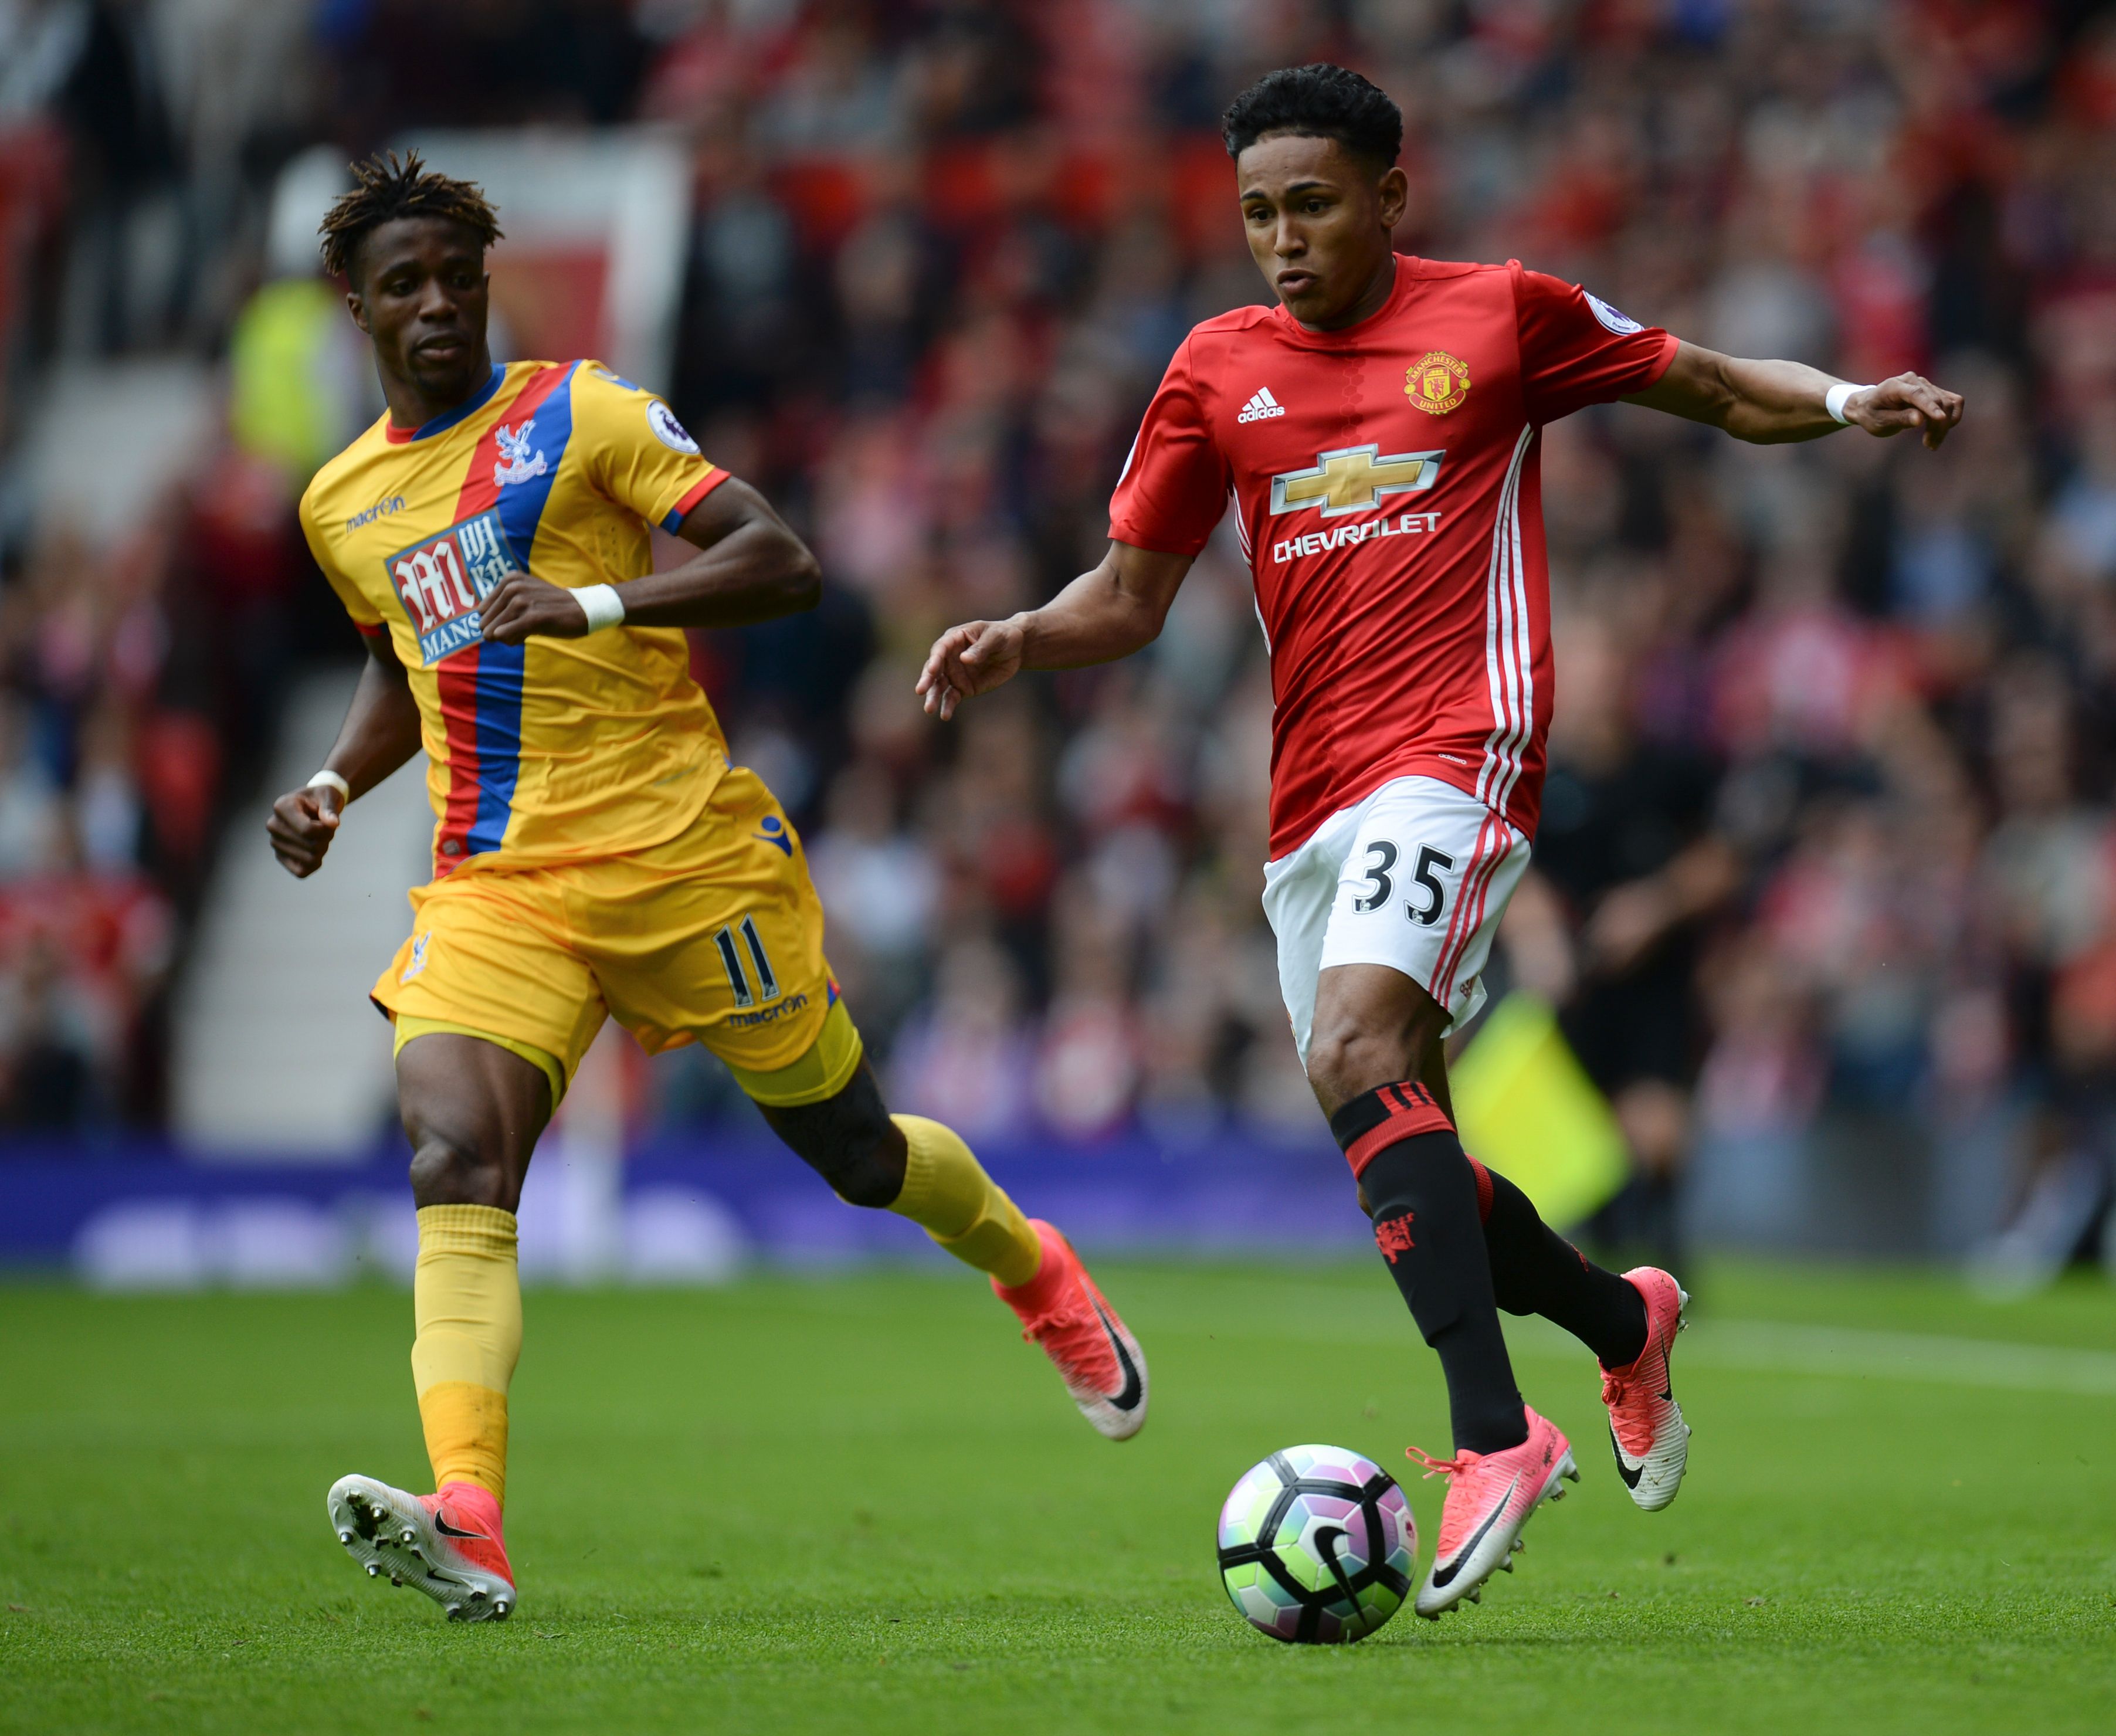 Manchester United's English defender Demetri Mitchell (R) battles with Crystal Palace's Ivorian striker Wilfried Zaha (L) during the English Premier League football match between Manchester United and Cyrstal Palace at Old Trafford in Manchester, north west England, on May 21, 2017. / AFP PHOTO / Oli SCARFF / RESTRICTED TO EDITORIAL USE. No use with unauthorized audio, video, data, fixture lists, club/league logos or 'live' services. Online in-match use limited to 75 images, no video emulation. No use in betting, games or single club/league/player publications.  /         (Photo credit should read OLI SCARFF/AFP/Getty Images)